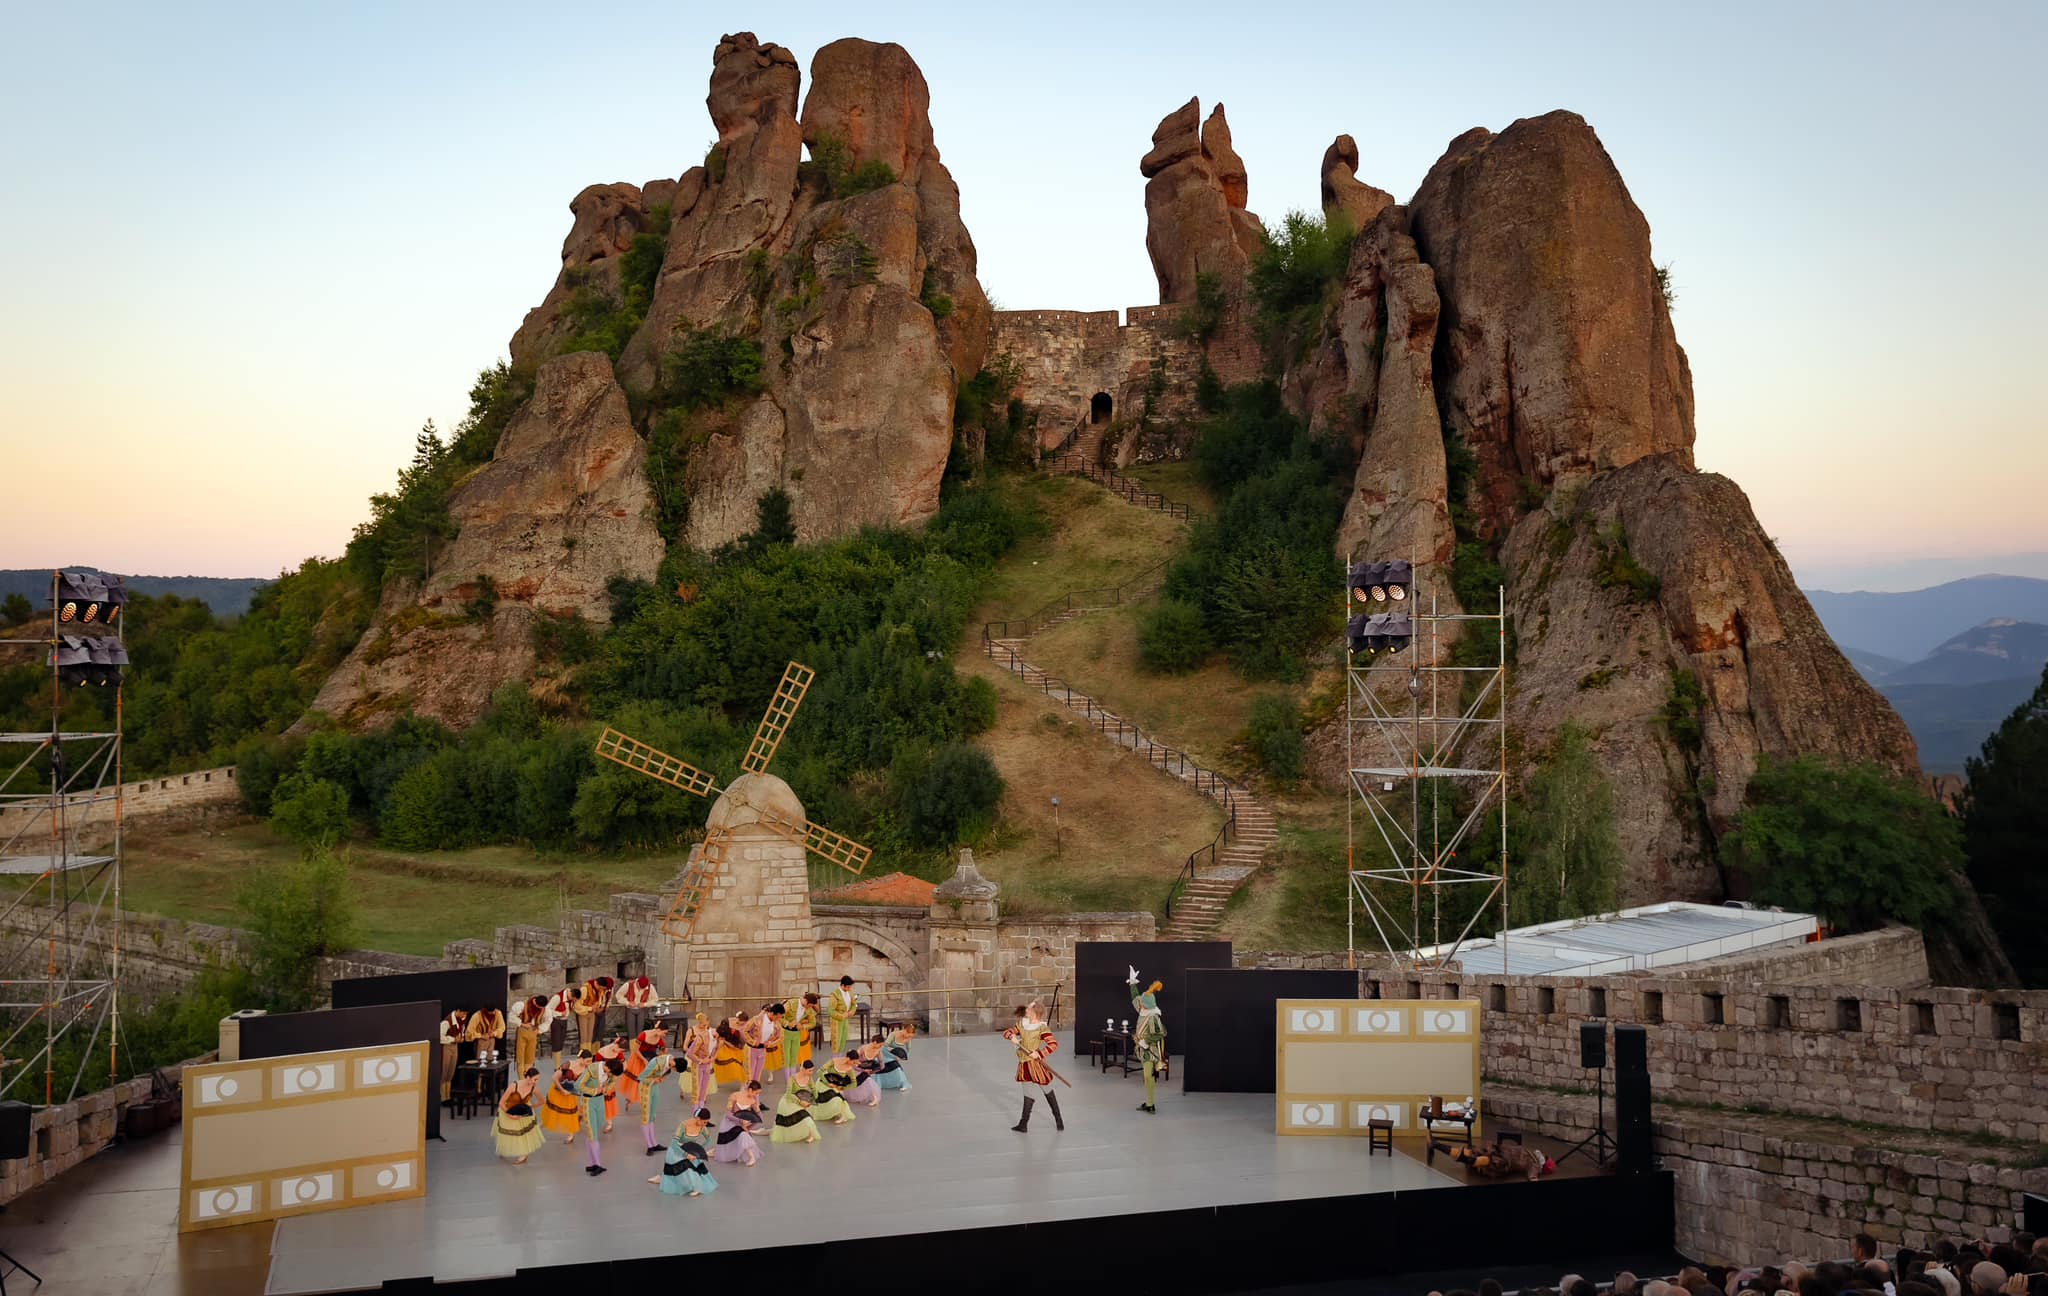 The ballet spectacle "Don Quixote" by Ludwig Minkus on the summer stage "Opera of the Peaks"